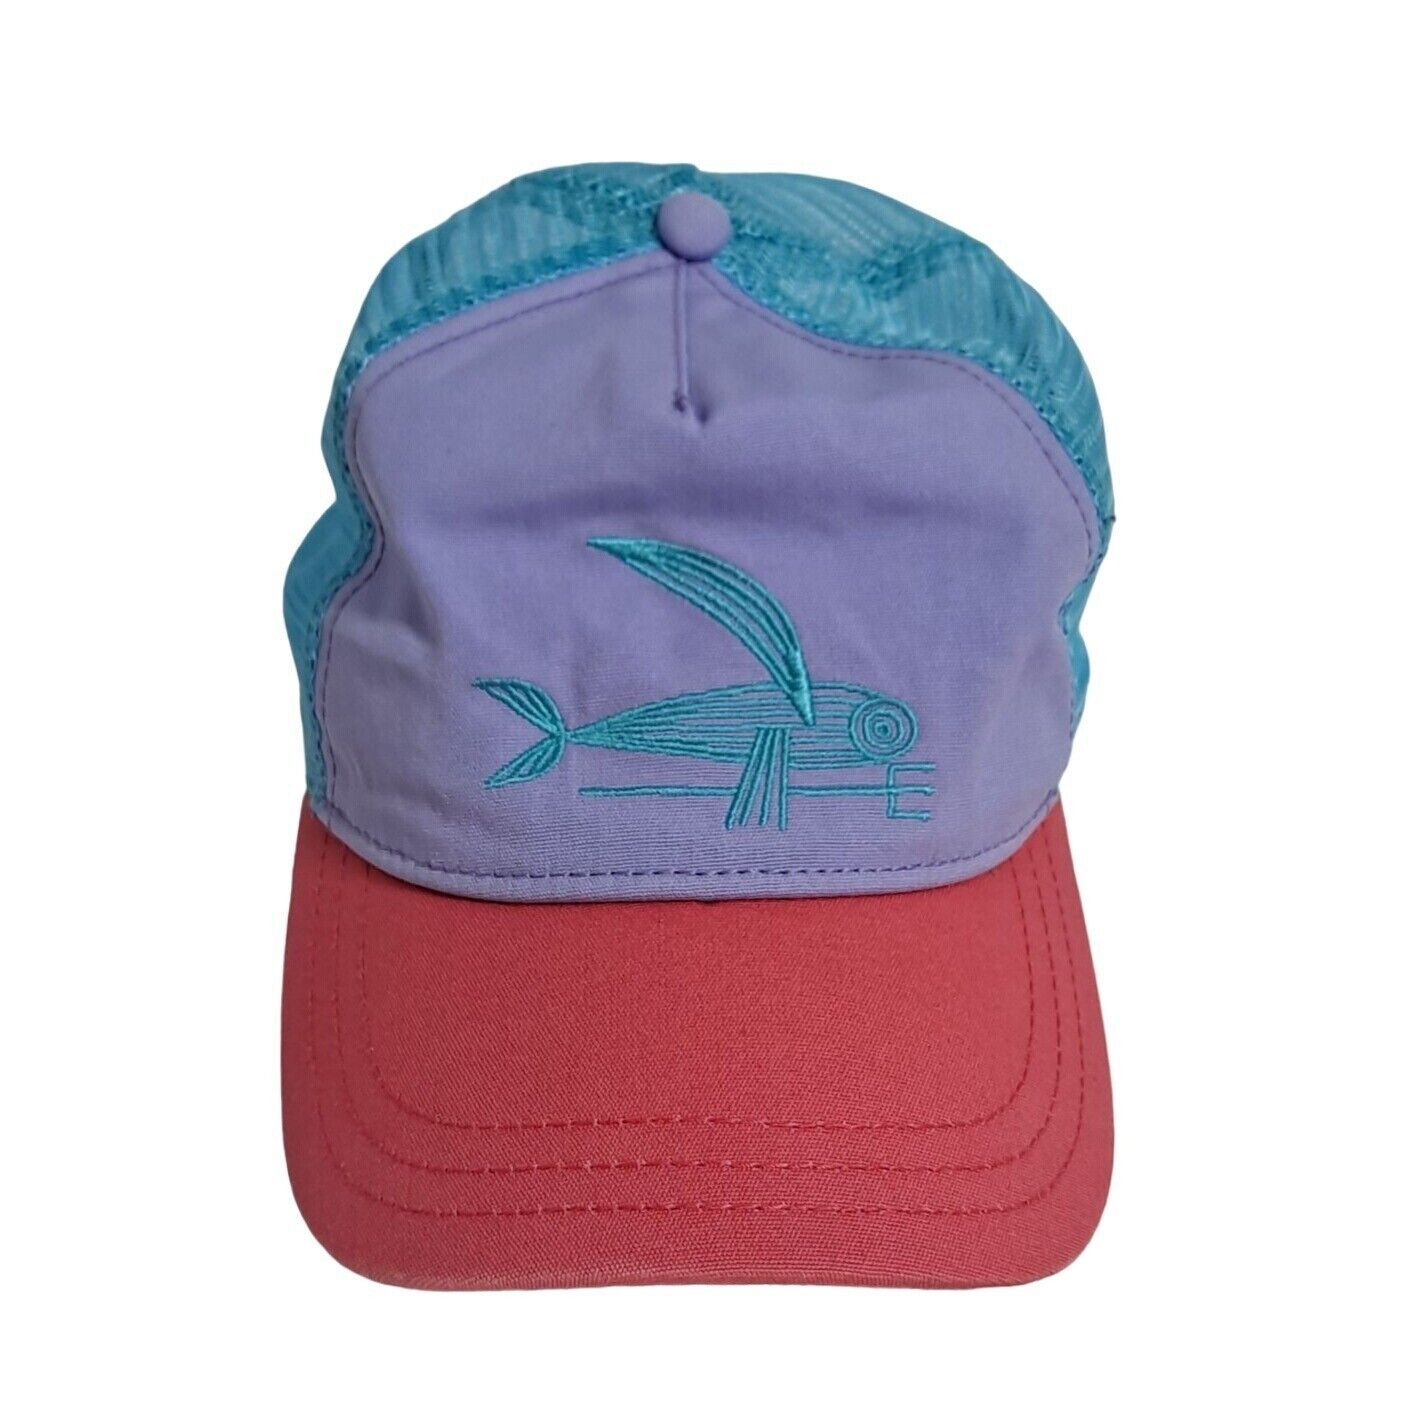 Patagonia Hat Snapback Mesh Trucker Purple Fly Fishing Trident Embroidered